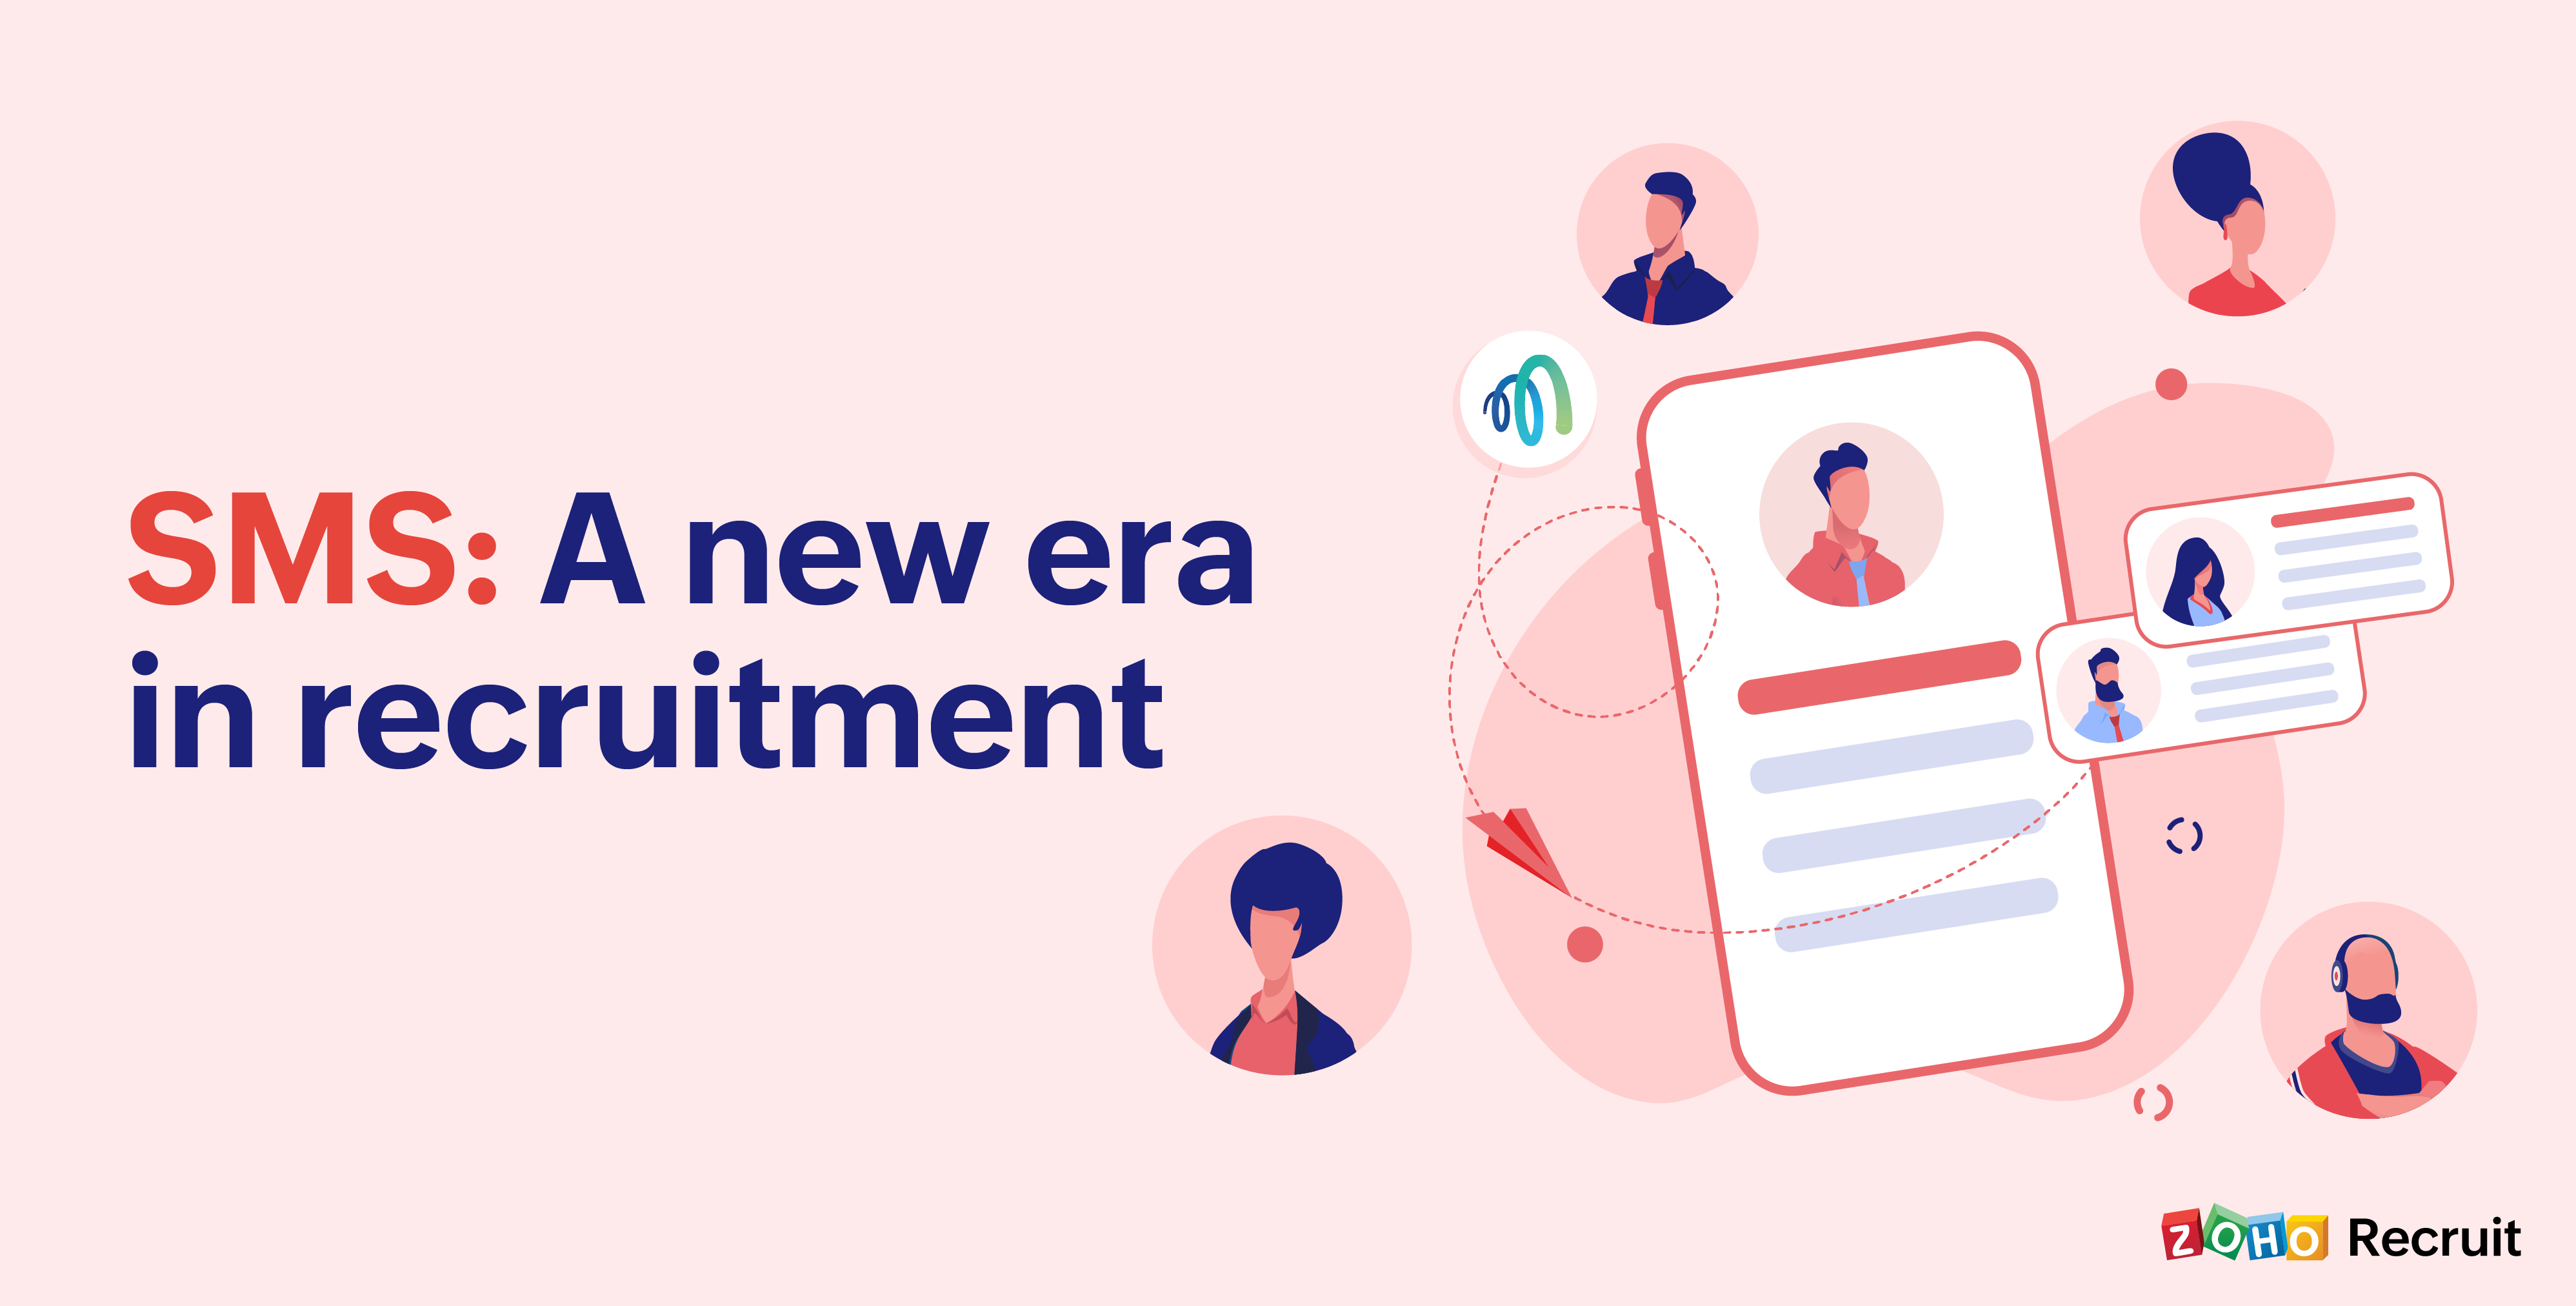 How you can use SMS throughout the candidate hiring process